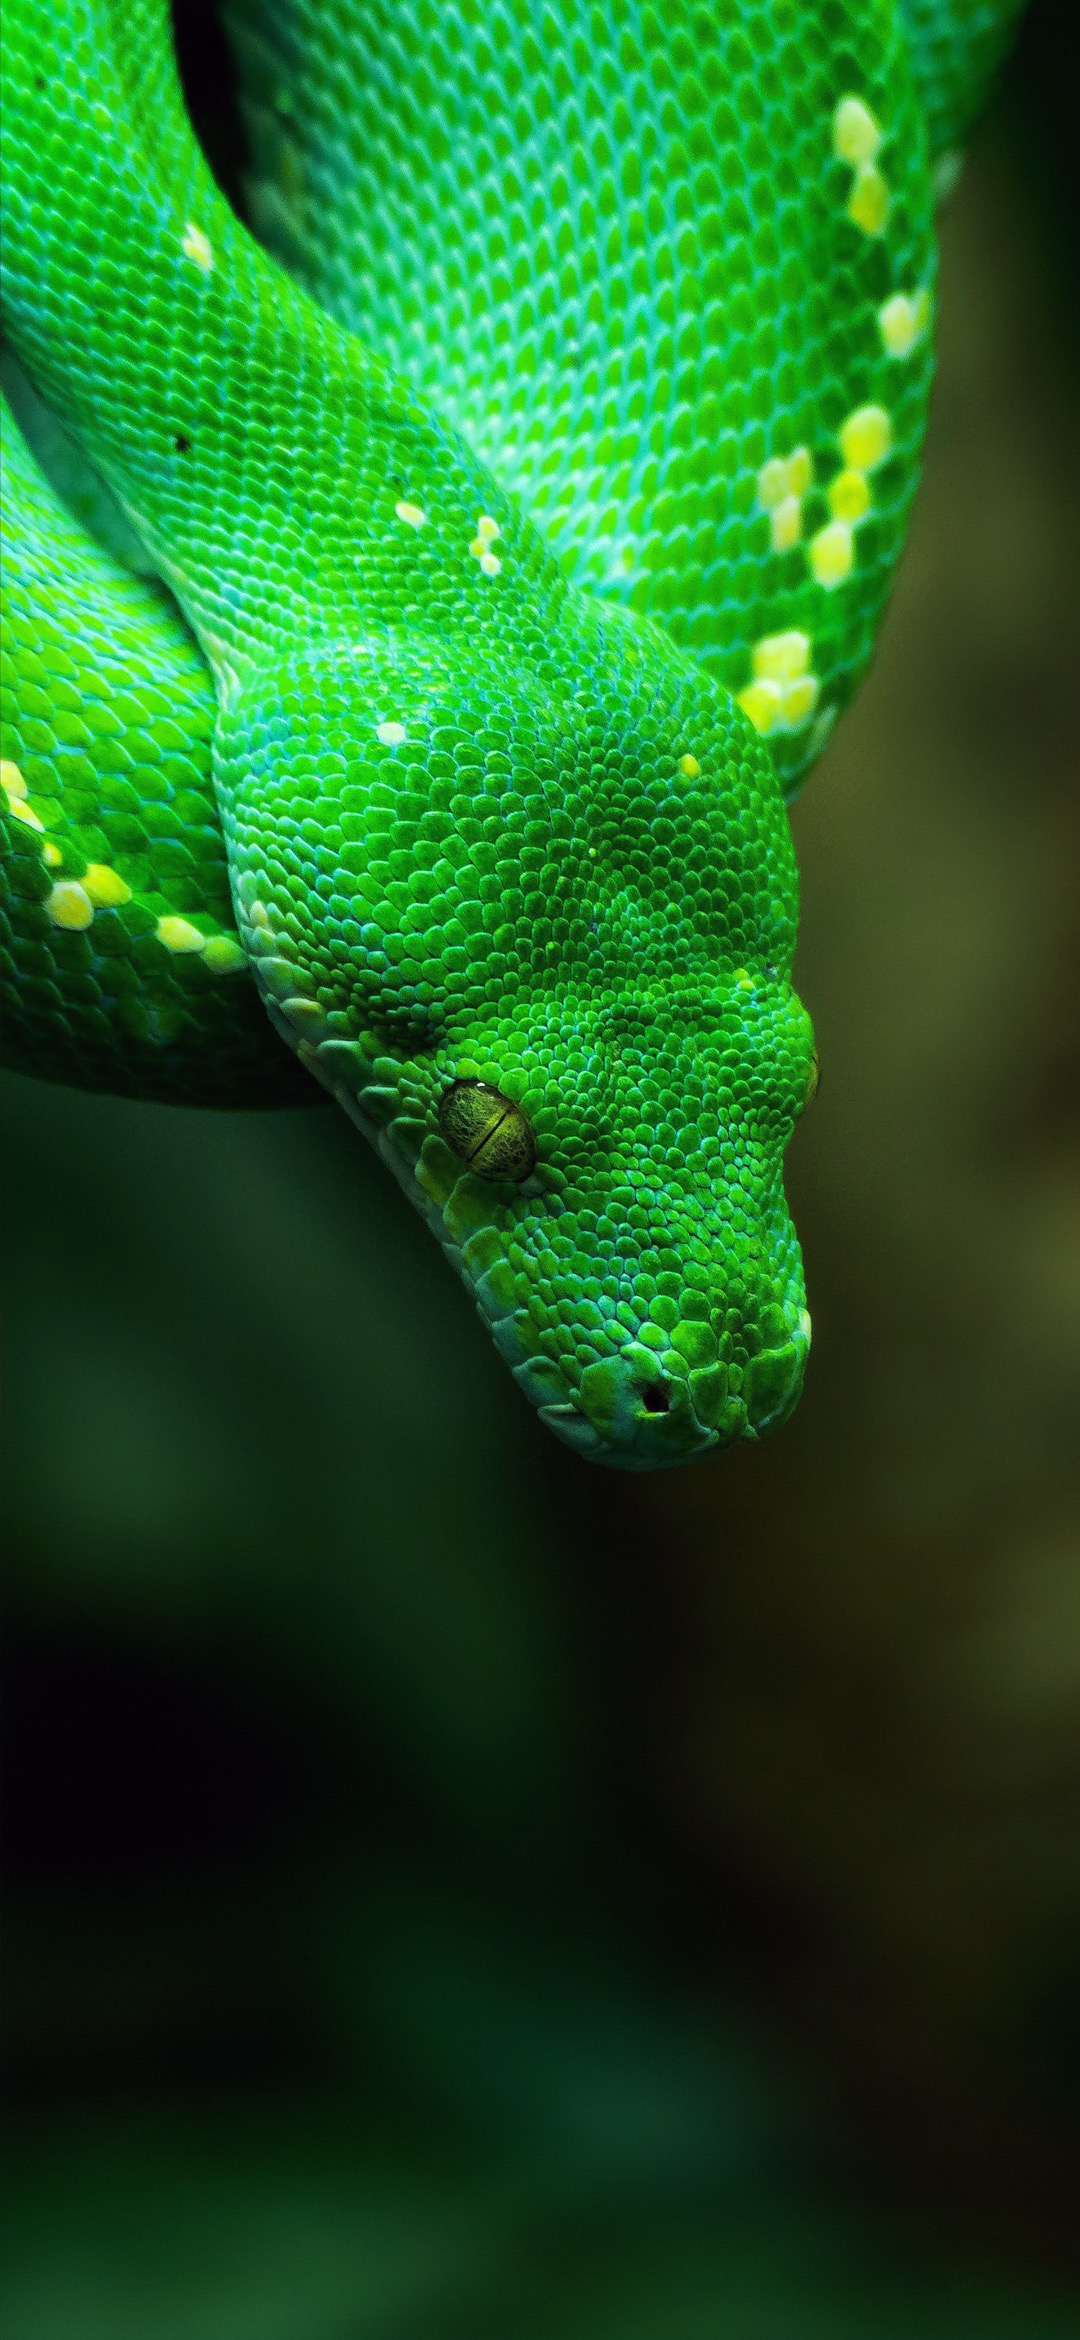 Reptile Photos Download The BEST Free Reptile Stock Photos  HD Images